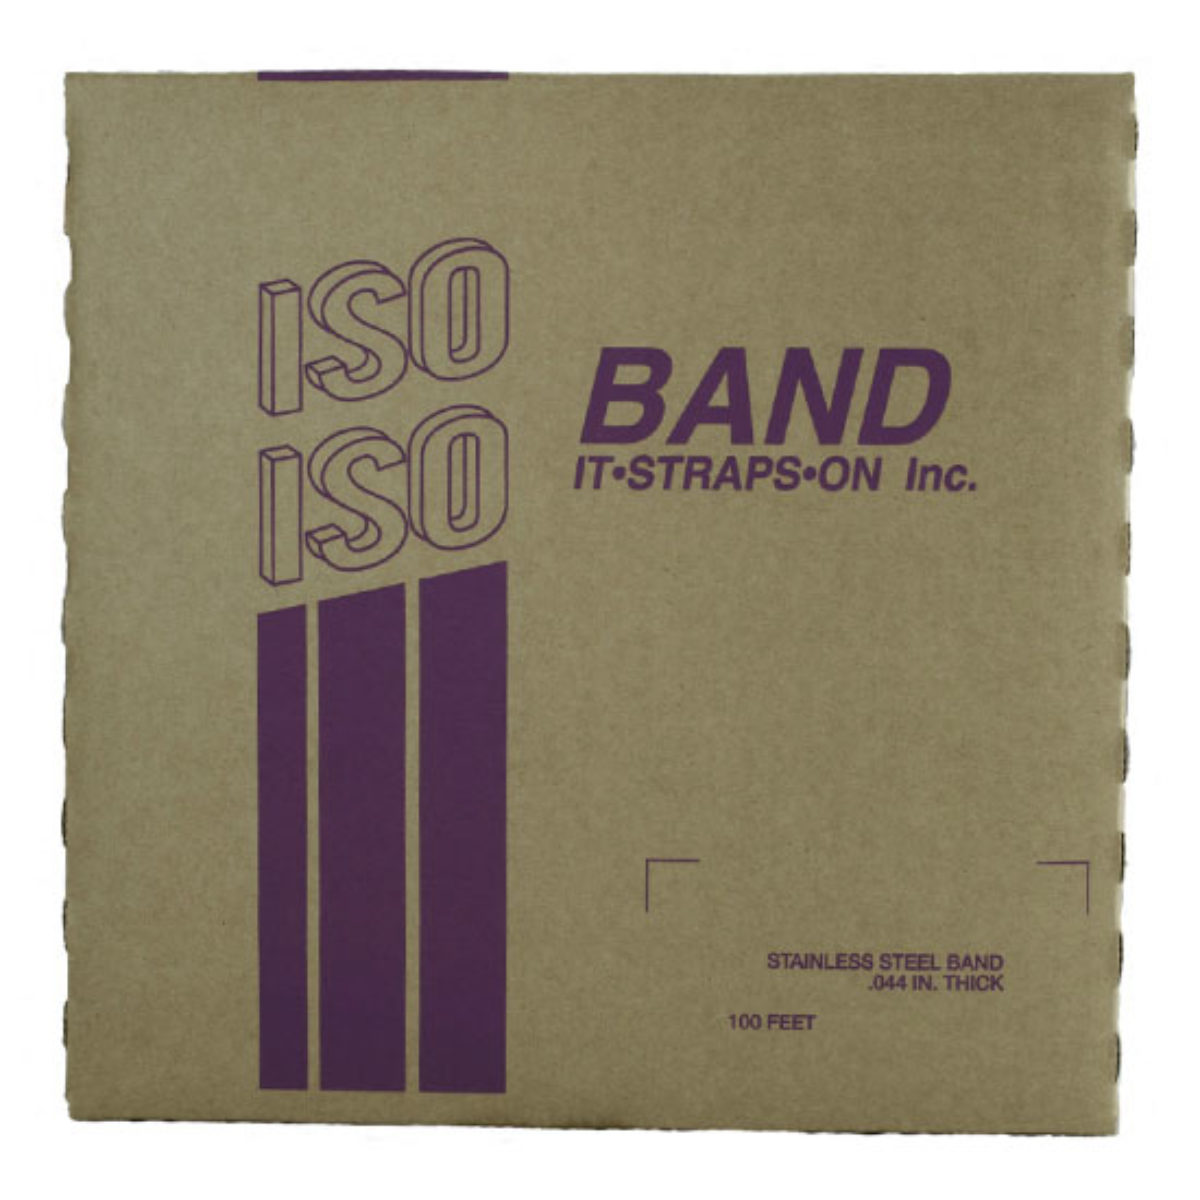 Band-It Giant Bands, 1 in x 100 ft, 0.044 in Thick, Stainless